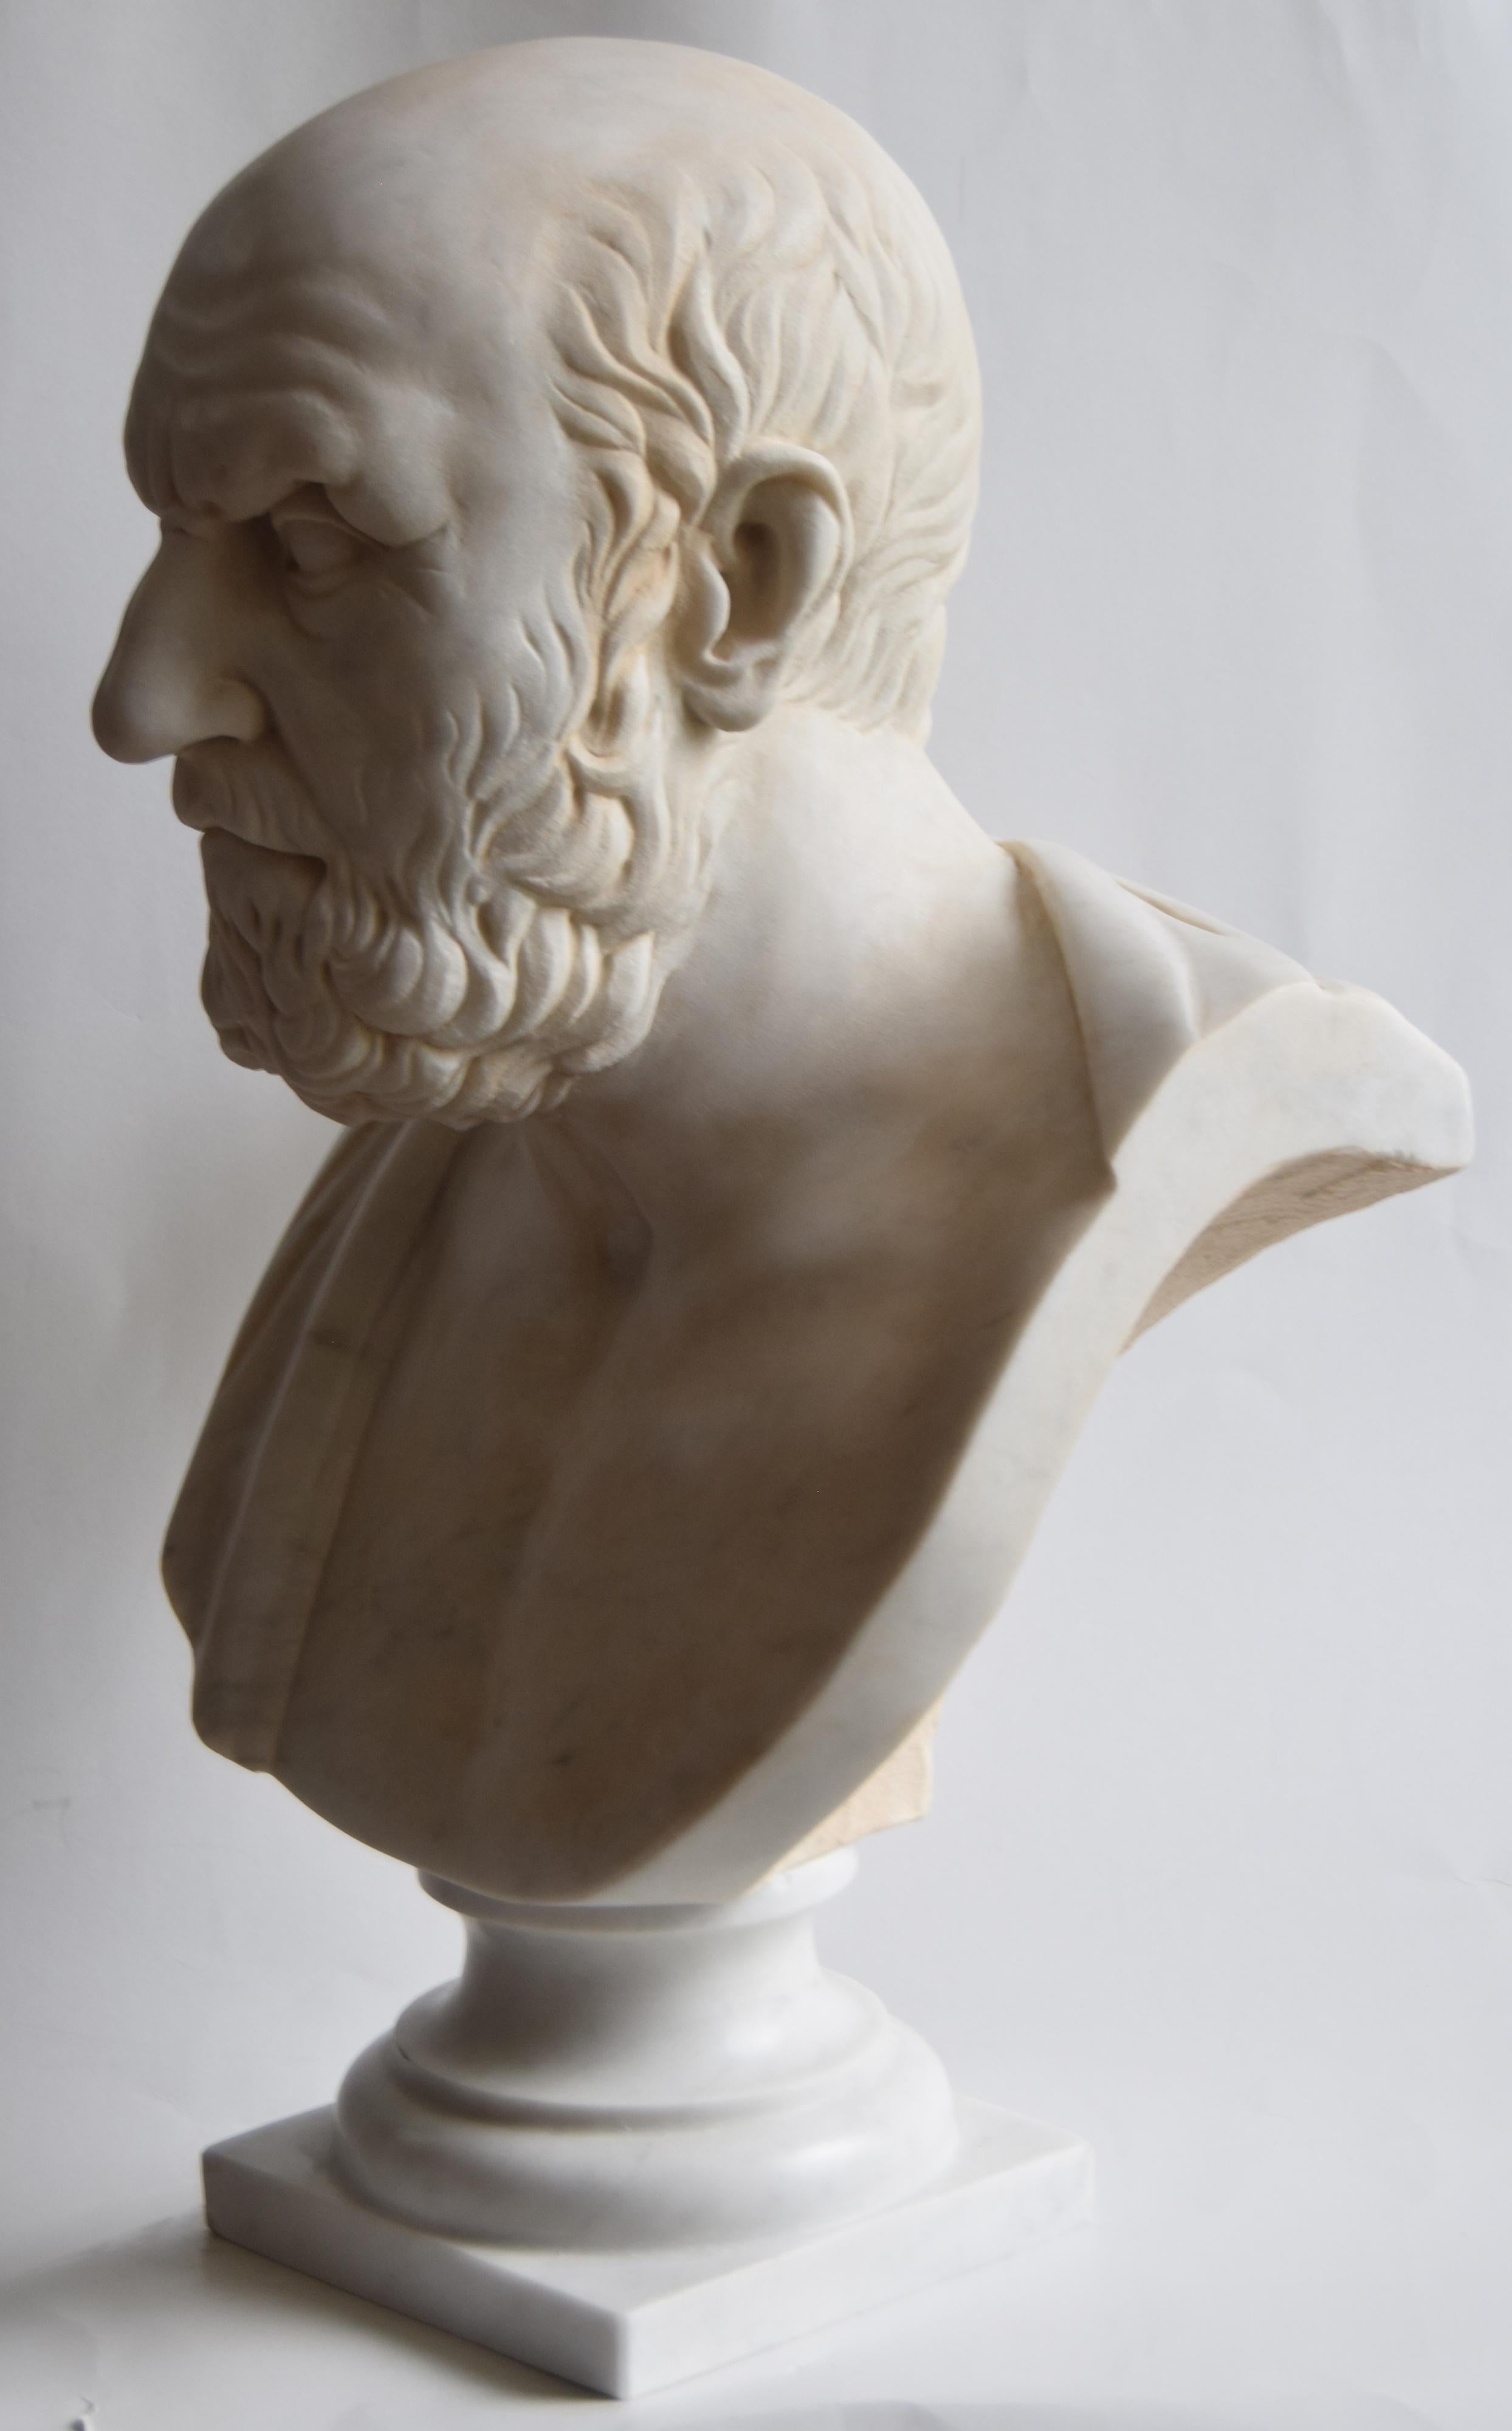 Sculpture, Hippocrates bust, Hippocrates, medicine father bust, ancient Roman bust, Roman art, classical art, Greek art, bust, white Carrara marble, classical sculpture, ancient sculpture, ancient bust, made in Italy
Bust carved on beautiful white